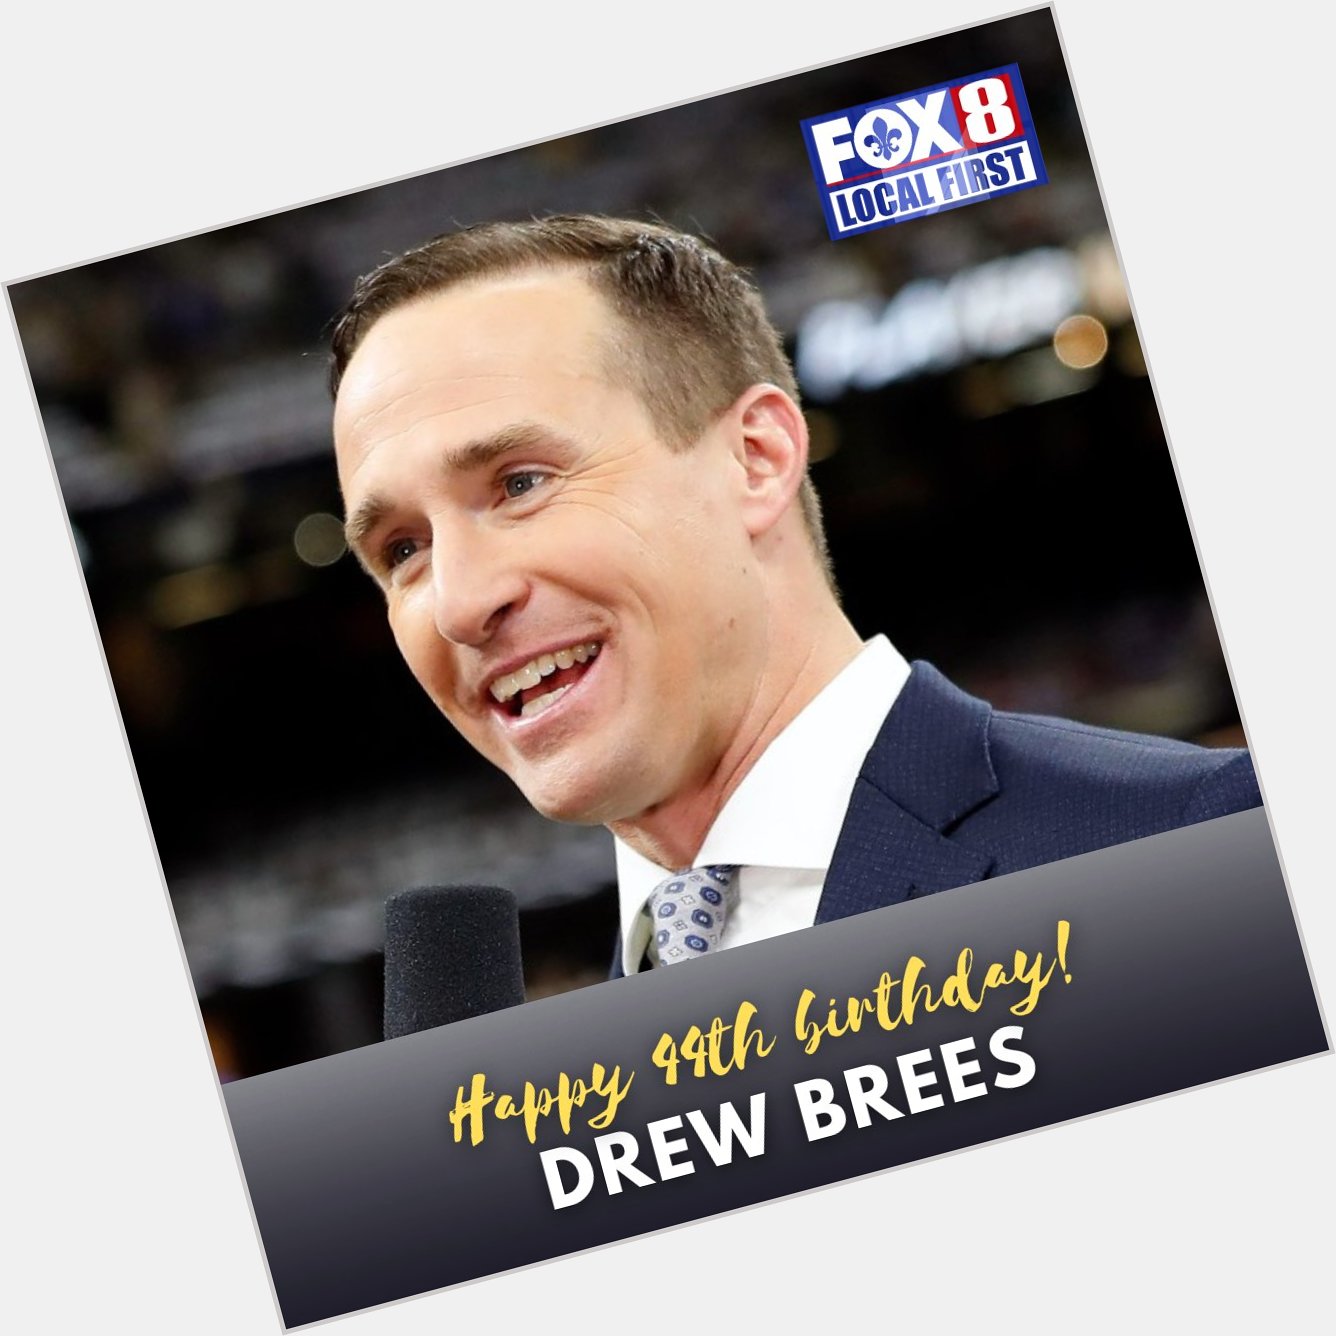 FOX8NOLA: Join us in wishing a happy birthday to Drew Brees, who turned 44 on Sunday! 